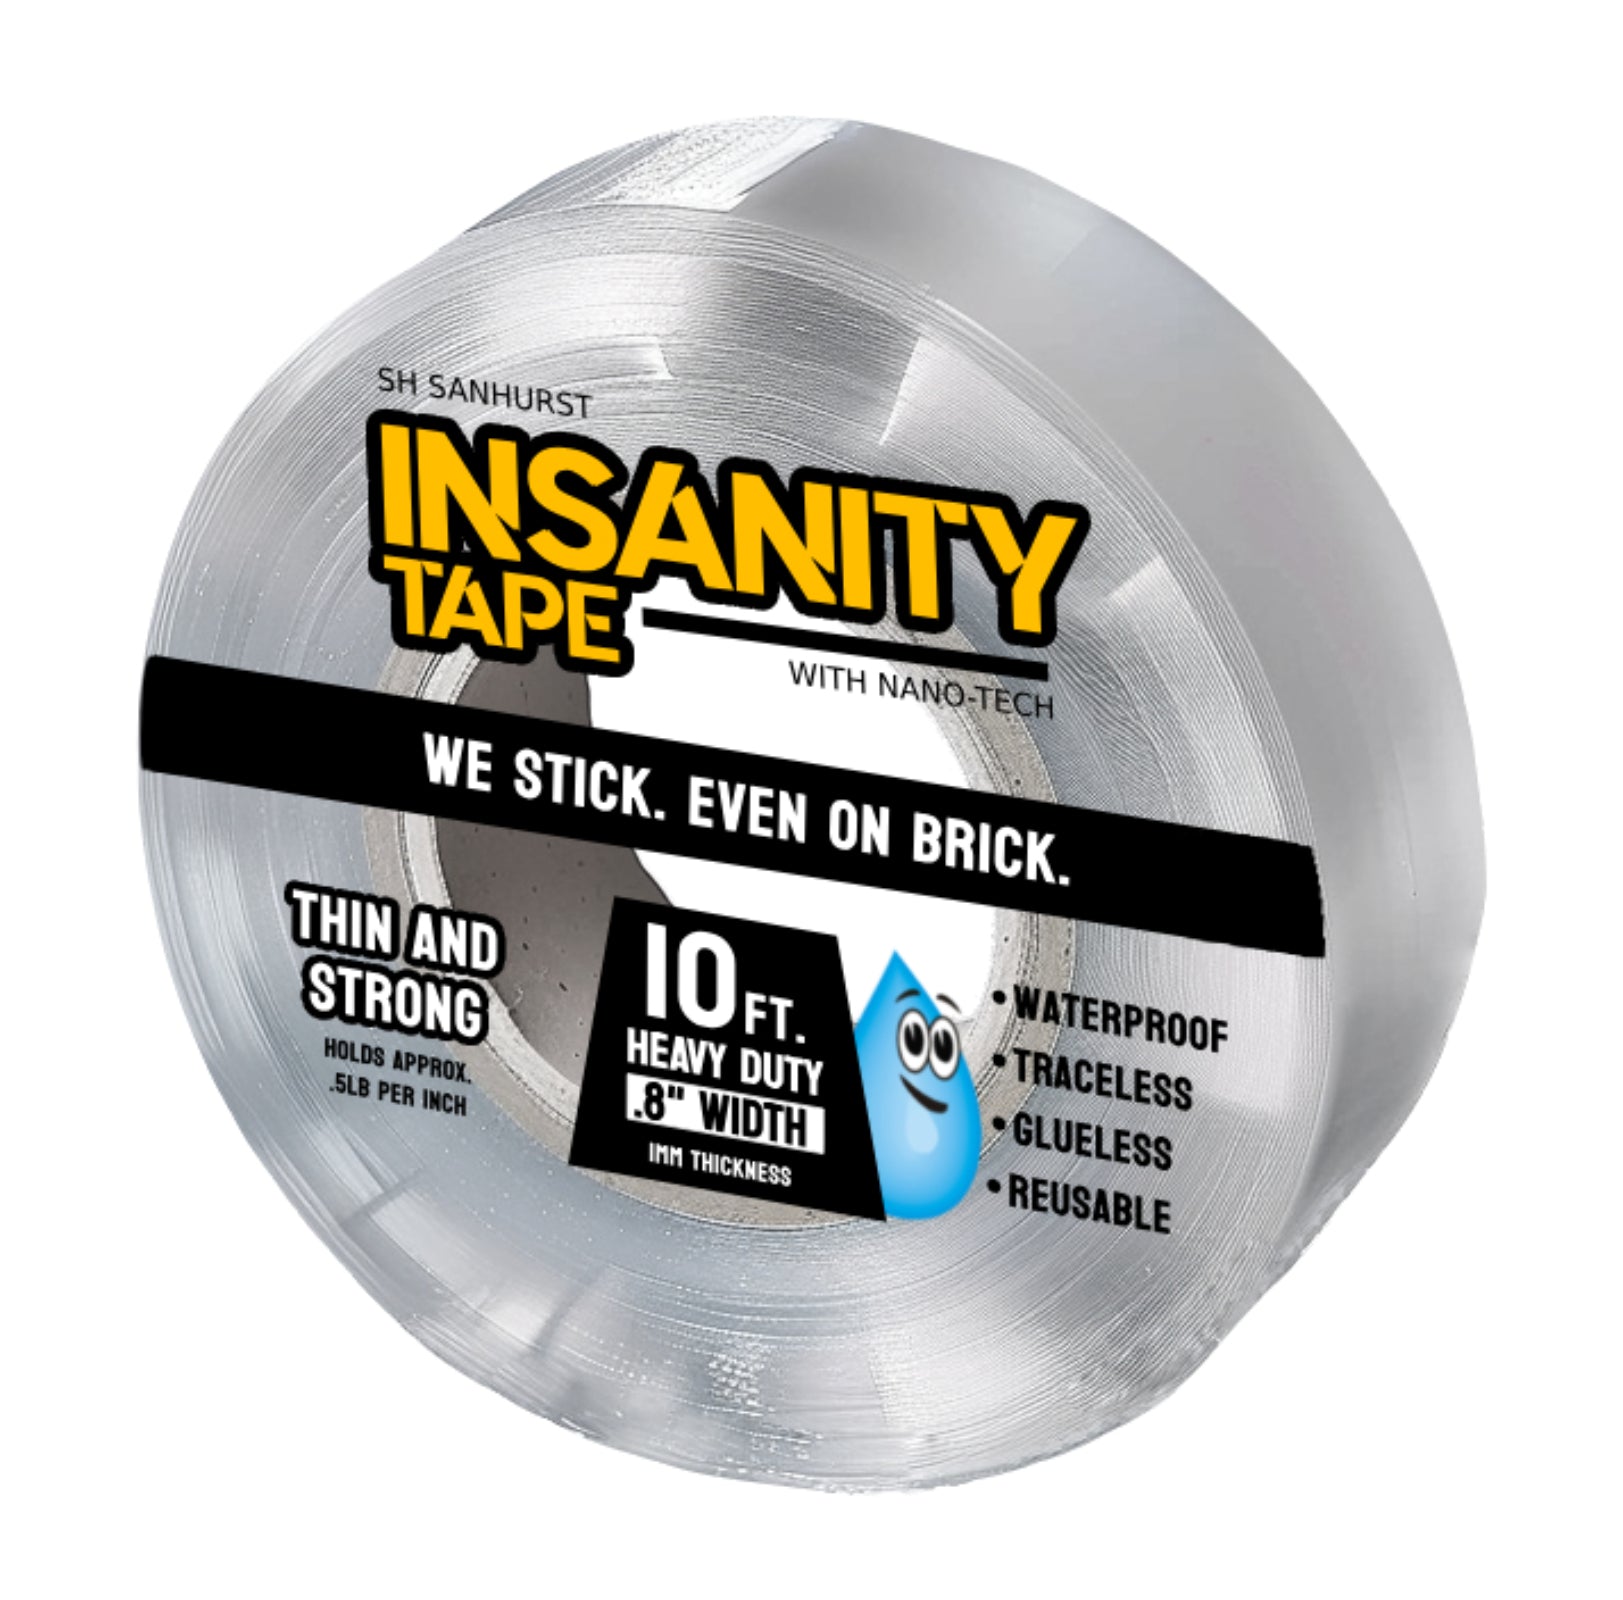 Insanity Tape Thin & Slim 10ft Double Sided Mounting Nano Tape - Reusable Traceless Adhesive Gel Tape - The Insanity Tape Store